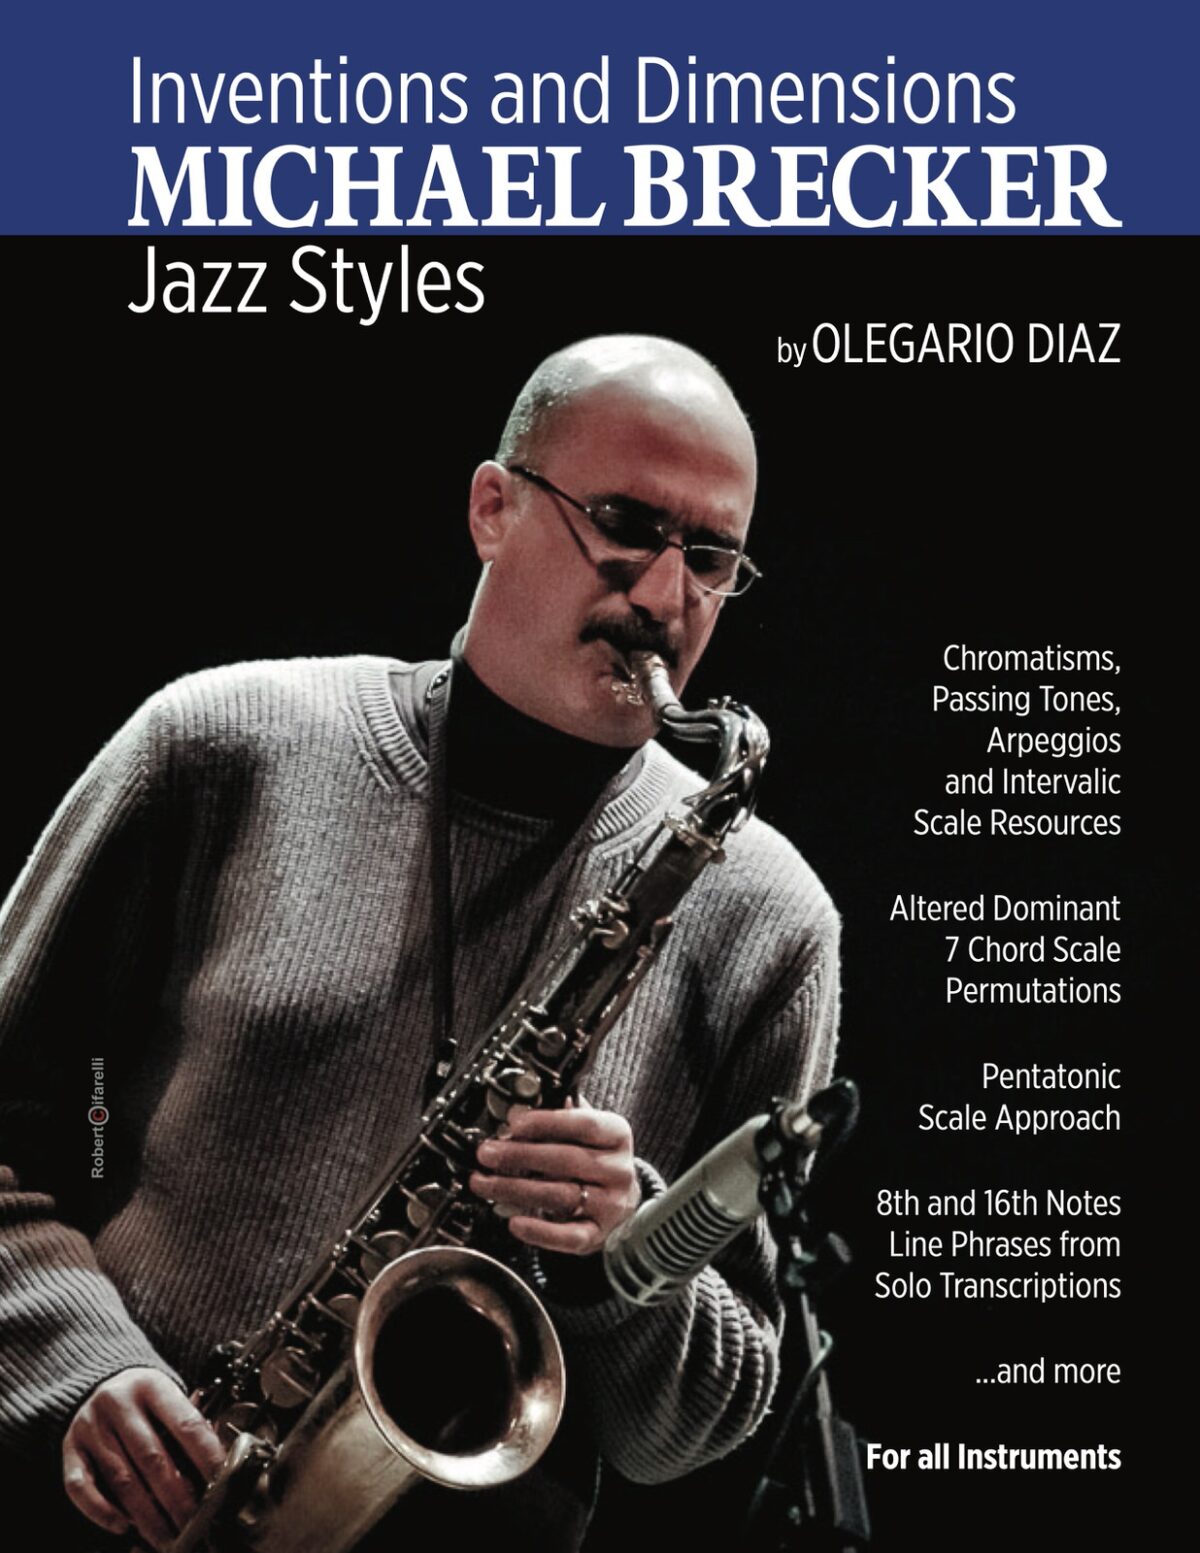 Diaz, Inventions and Dimensions Michael Brecker Jazz Styles-p001